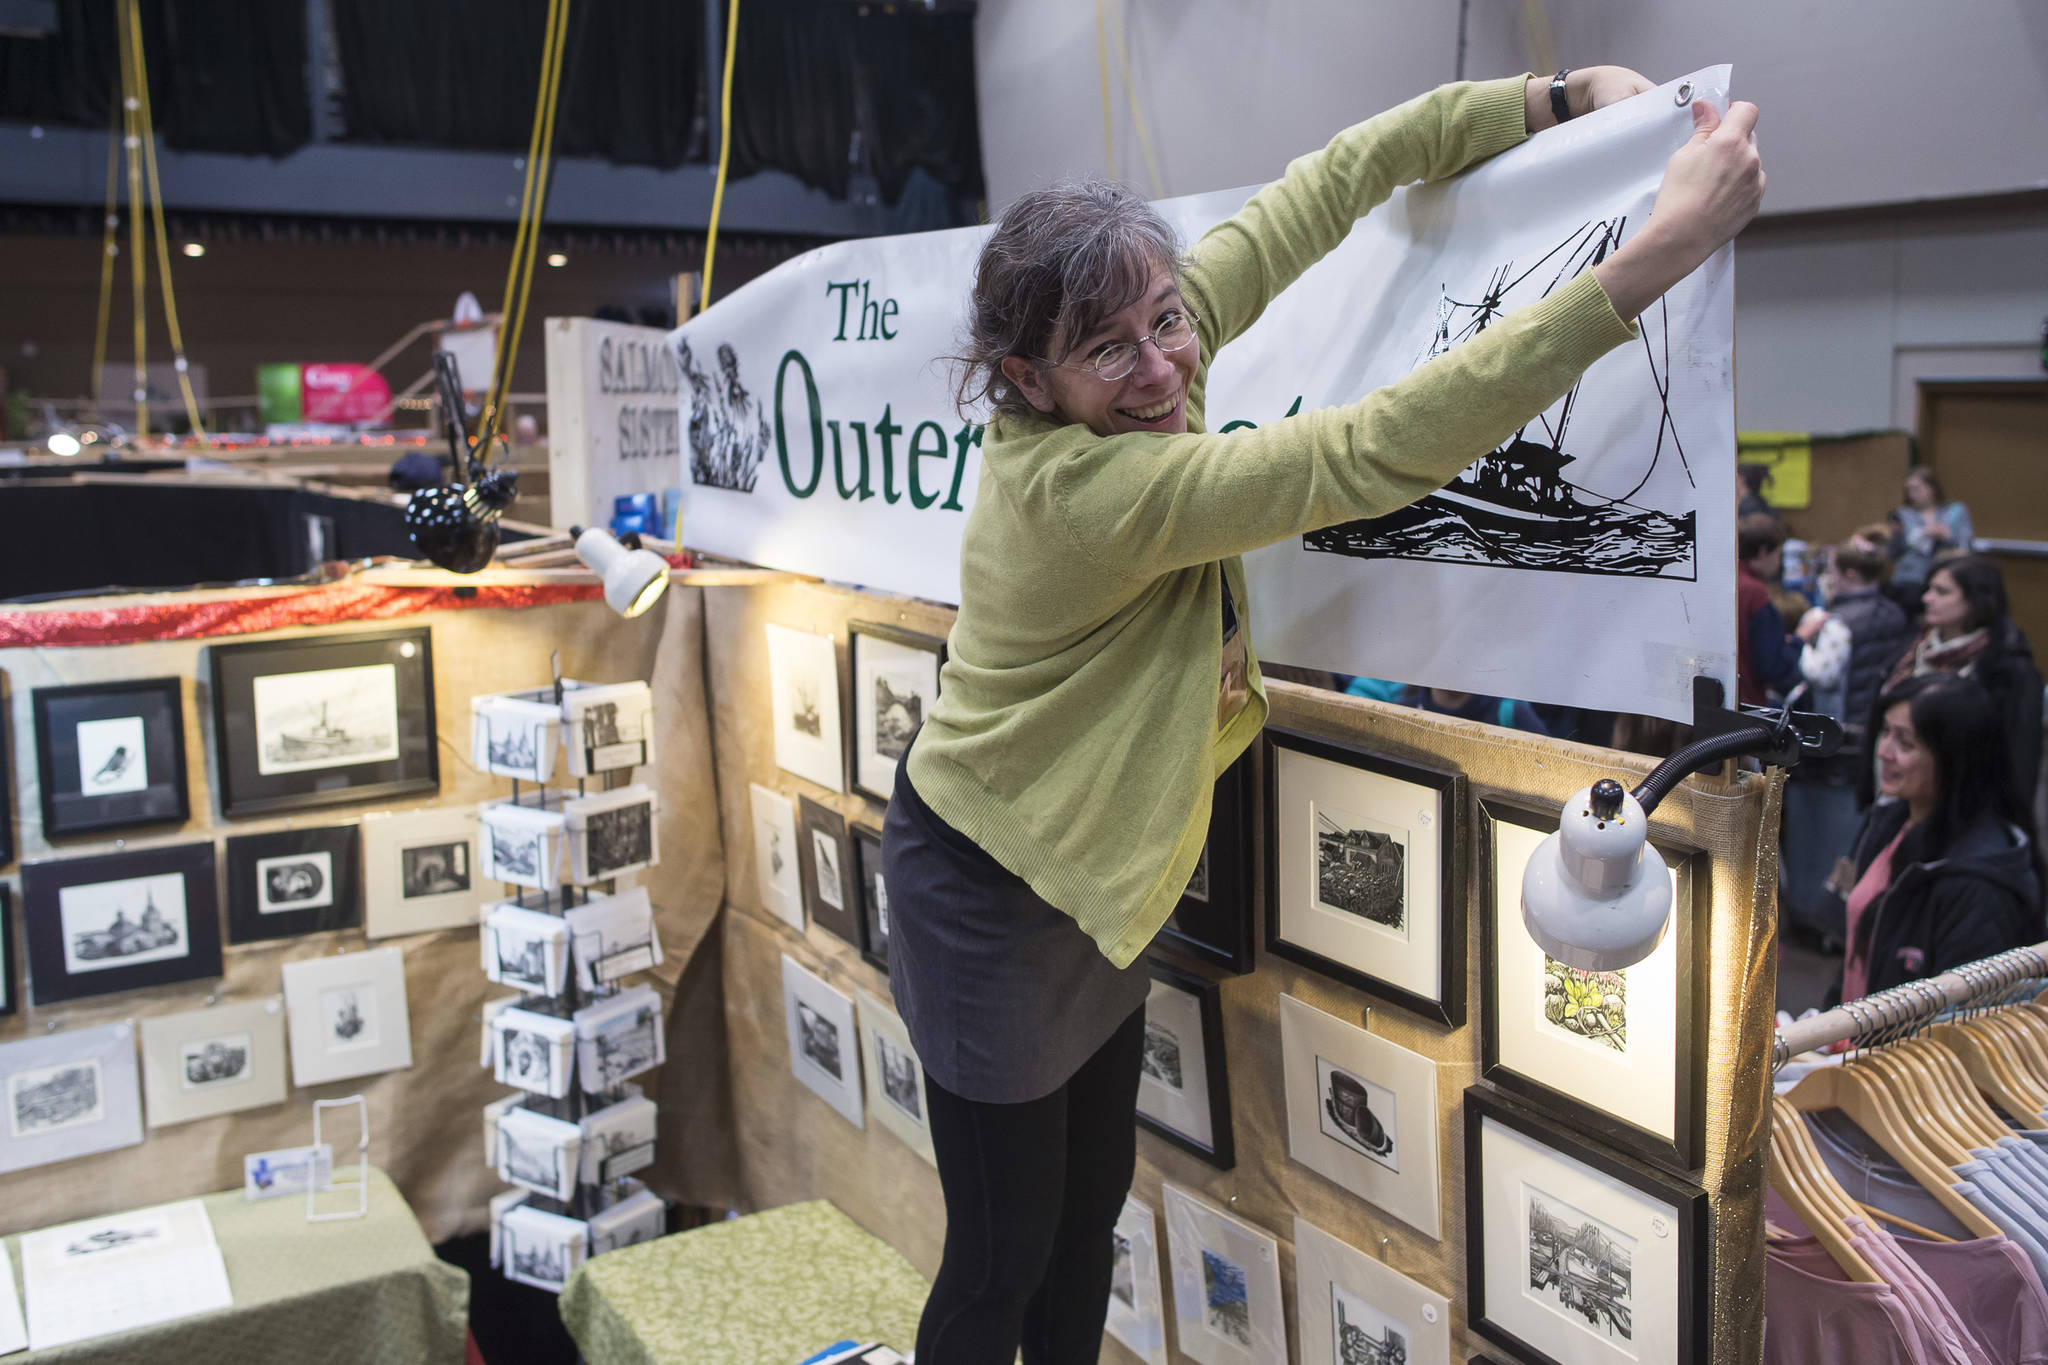 Rebecca Poulson ties up her sign “The Outer Coast” for her prints at the Public Market in Centennial Hall on Friday, Nov. 23, 2018. (Michael Penn | Juneau Empire File)